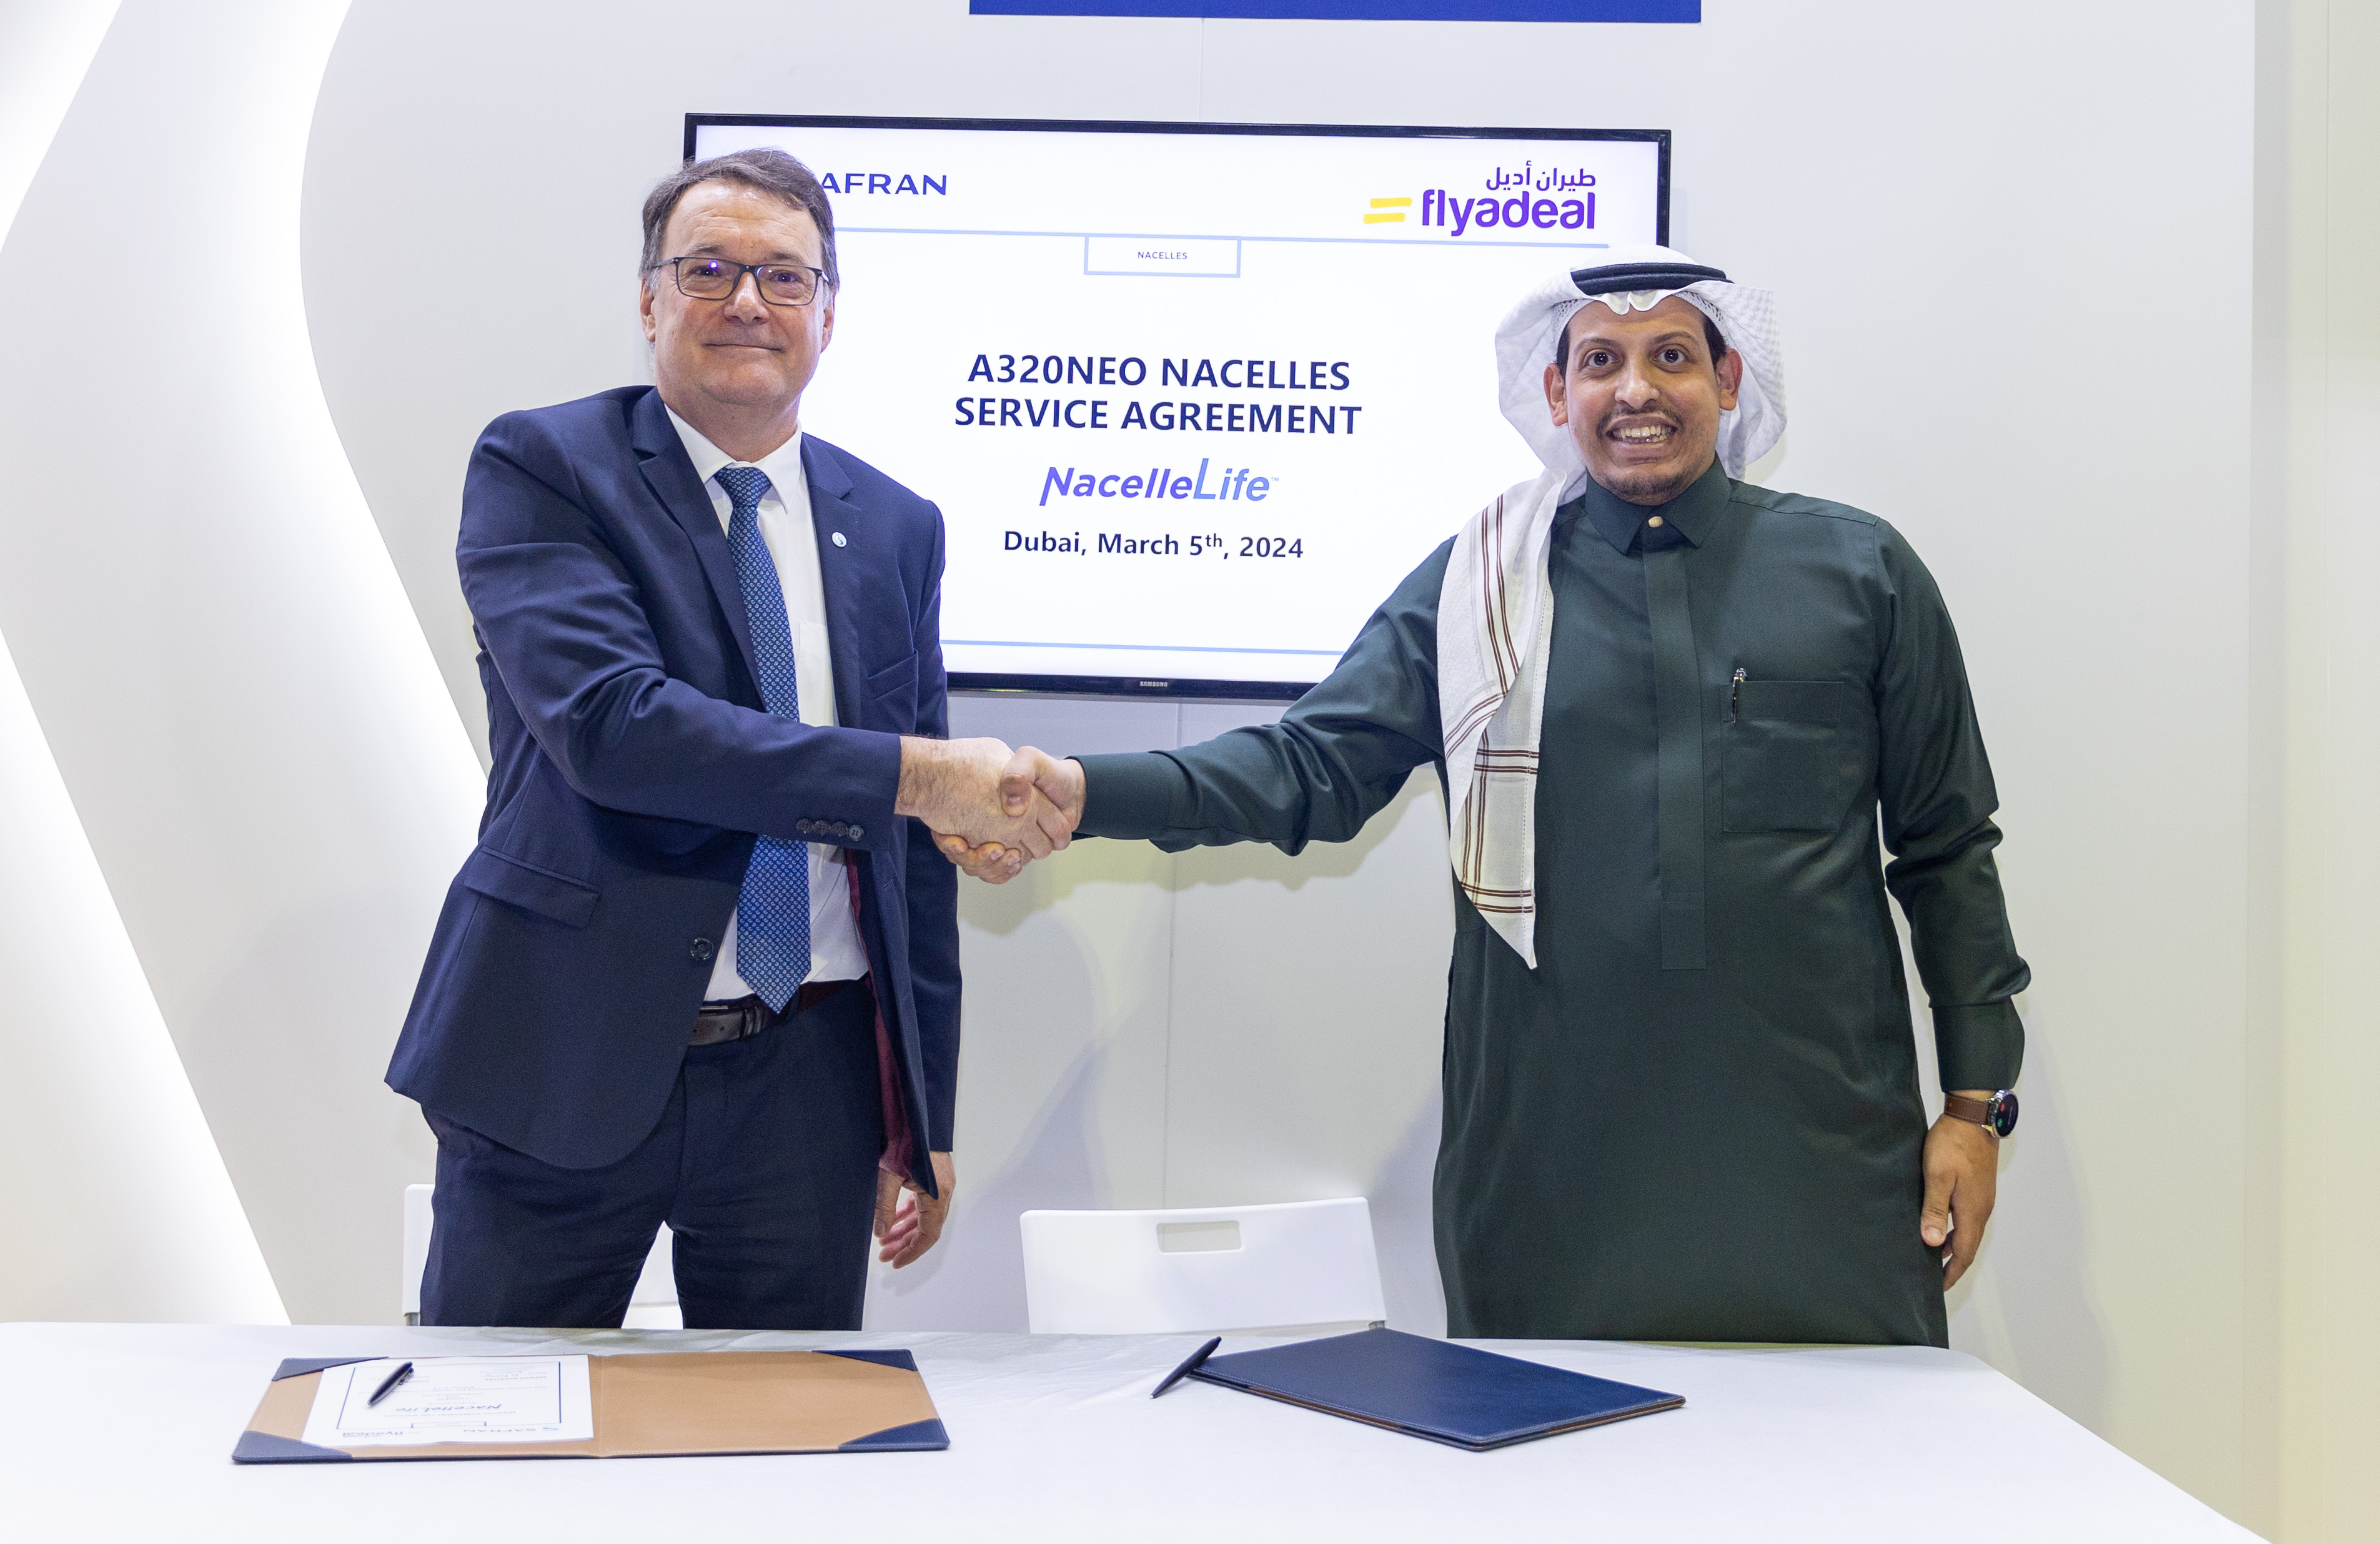 Saudia Group's Flyadeal Signs with Safran to Optimise Fleet maintenance Efficiency for the Nacelles of its Airbus A320neo Fleet.